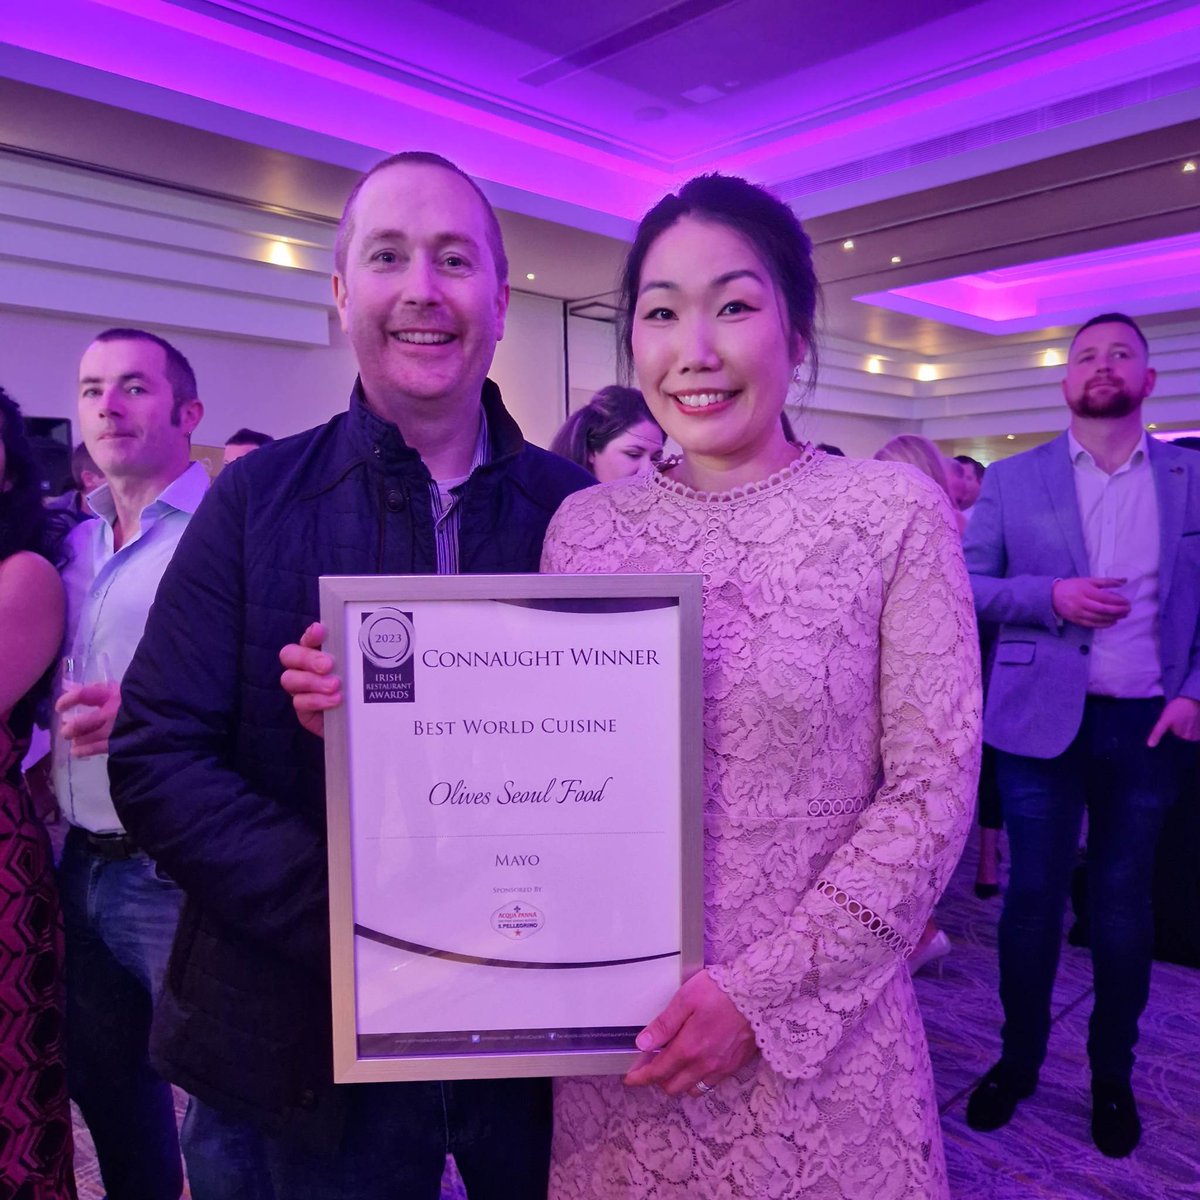 So honored to be awarded 'Best World Cuisine' in Mayo at the Irish Restaurant Awards last night. Thanks to all our hard working staff and all our great customers 😍🥰😍 #foodoscars #koreanfood #irishkorean @restawards